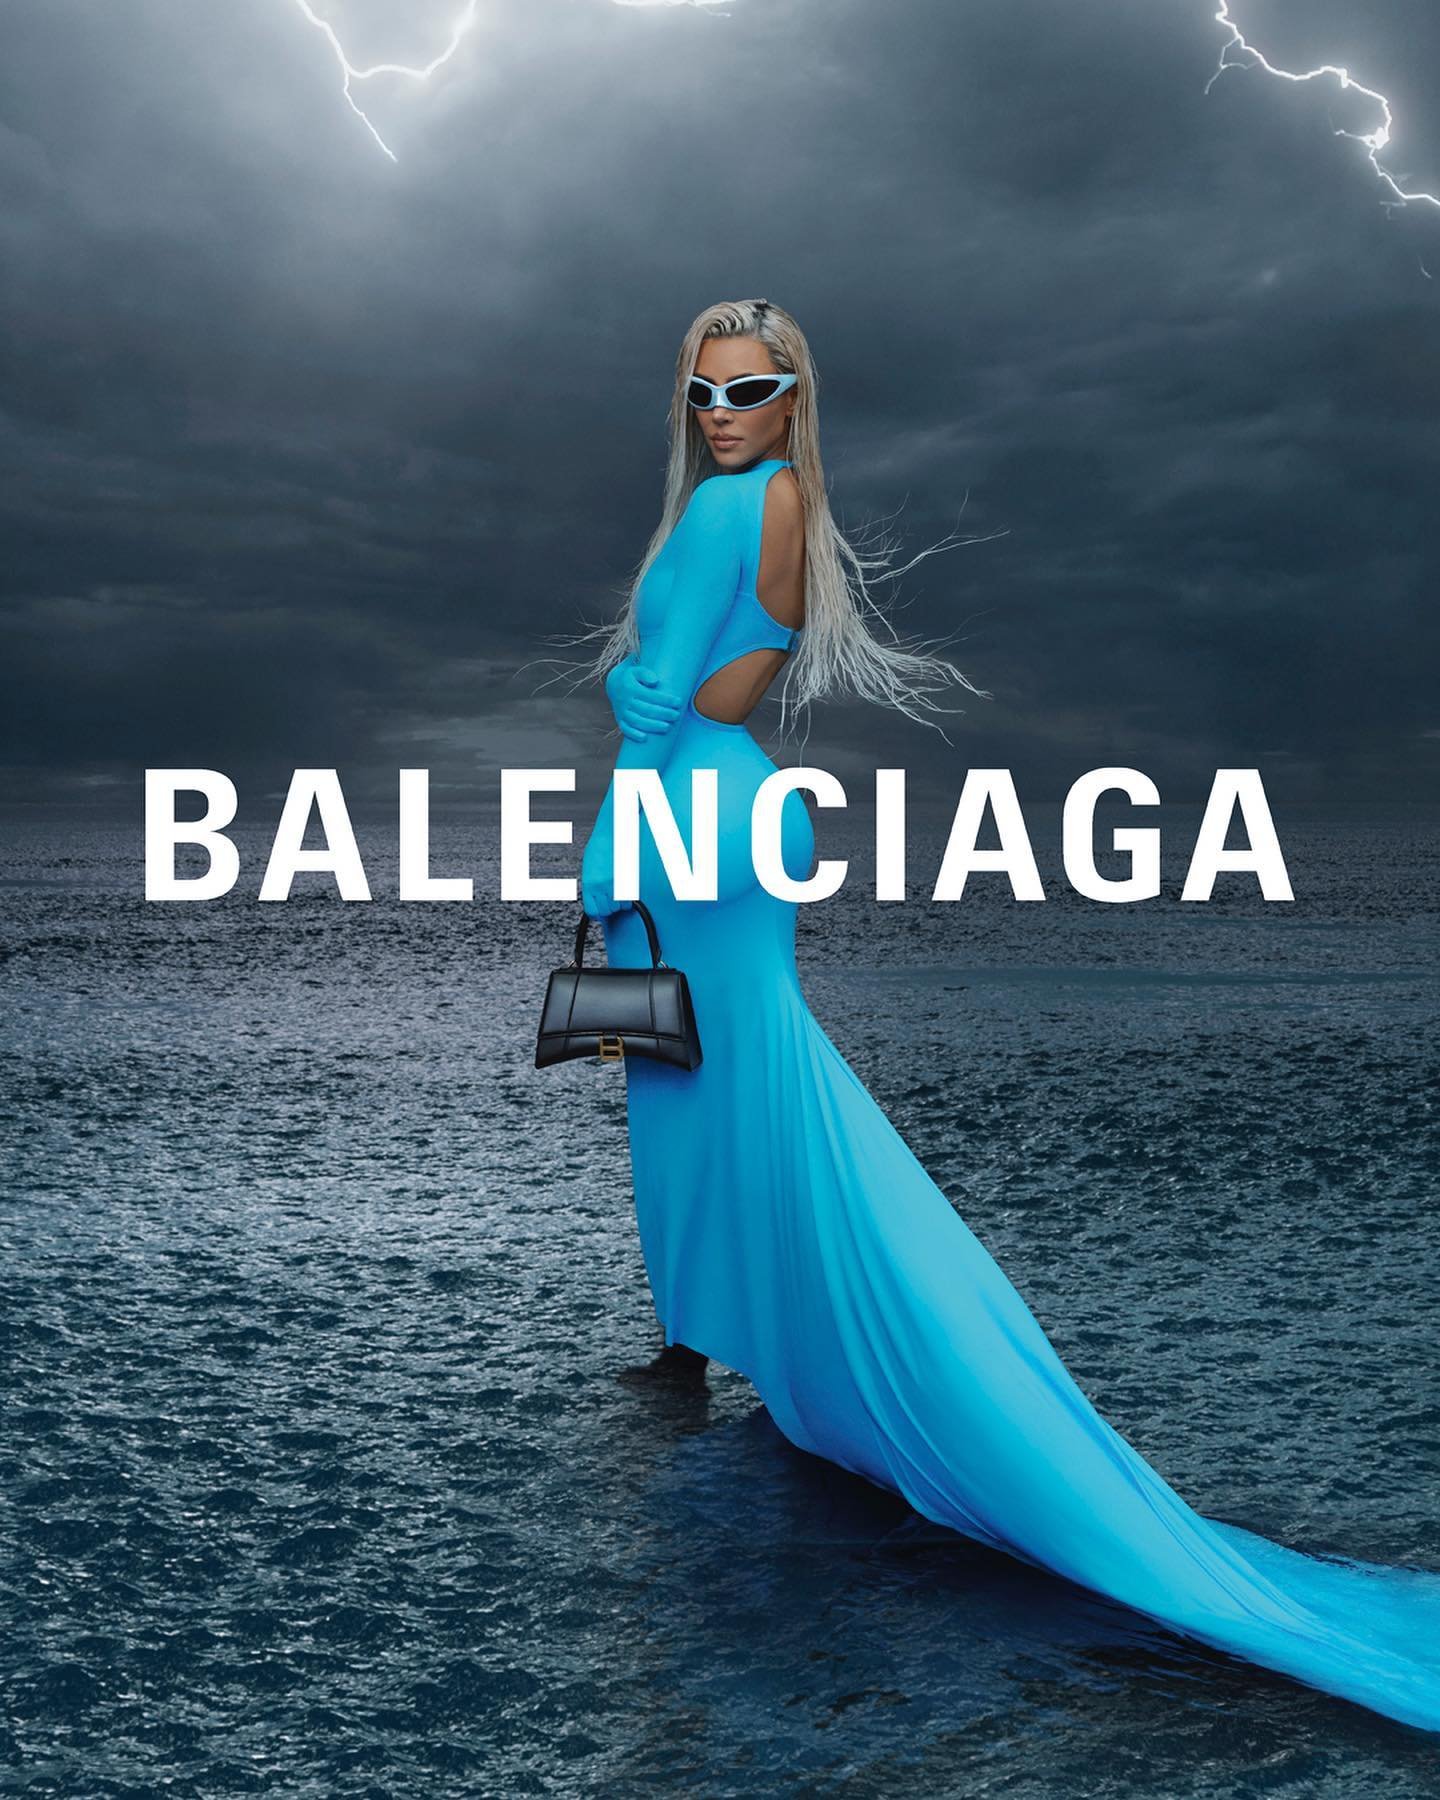 Balenciaga's Spring/Summer 2023 Campaign Featuring Child Models